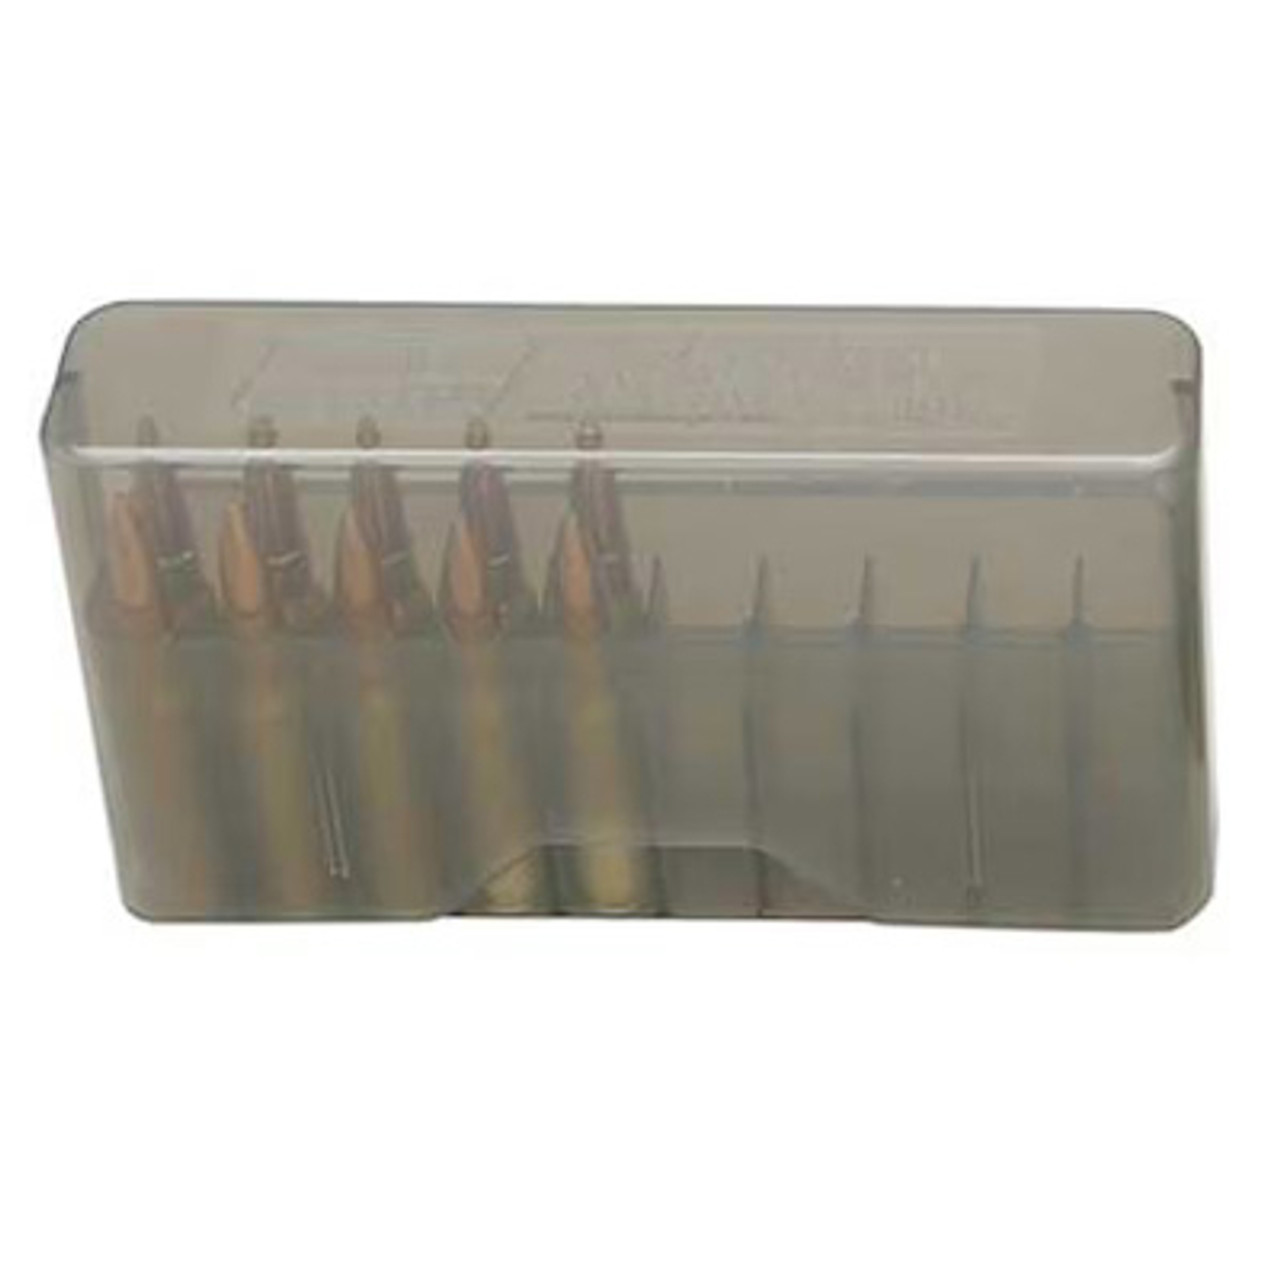 Manufacturer	Mtm
Pricing Unit	EA
Model	Slip-Top Ammo Box
UPC	026057207414
SKU	J20L41
Width	3.5000
Length	6.2000
Height	1.3000
Weight	0.2000
Application	RIFLE
Caliber	Multi-Caliber
Capacity	20 rd
Color	Clear Smoke
Dimension	1.45 X 3.50 X 6.20
Dimensions	3.36" OAL
Finish	Clear Smoke
Hardware	None
Material	Plastic
Series	Slip Top
Similar Items	ABOX
Size	270/3006/6.5
Style	Rifle
Type	Ammo Box
Type Operation	SLIP TOP